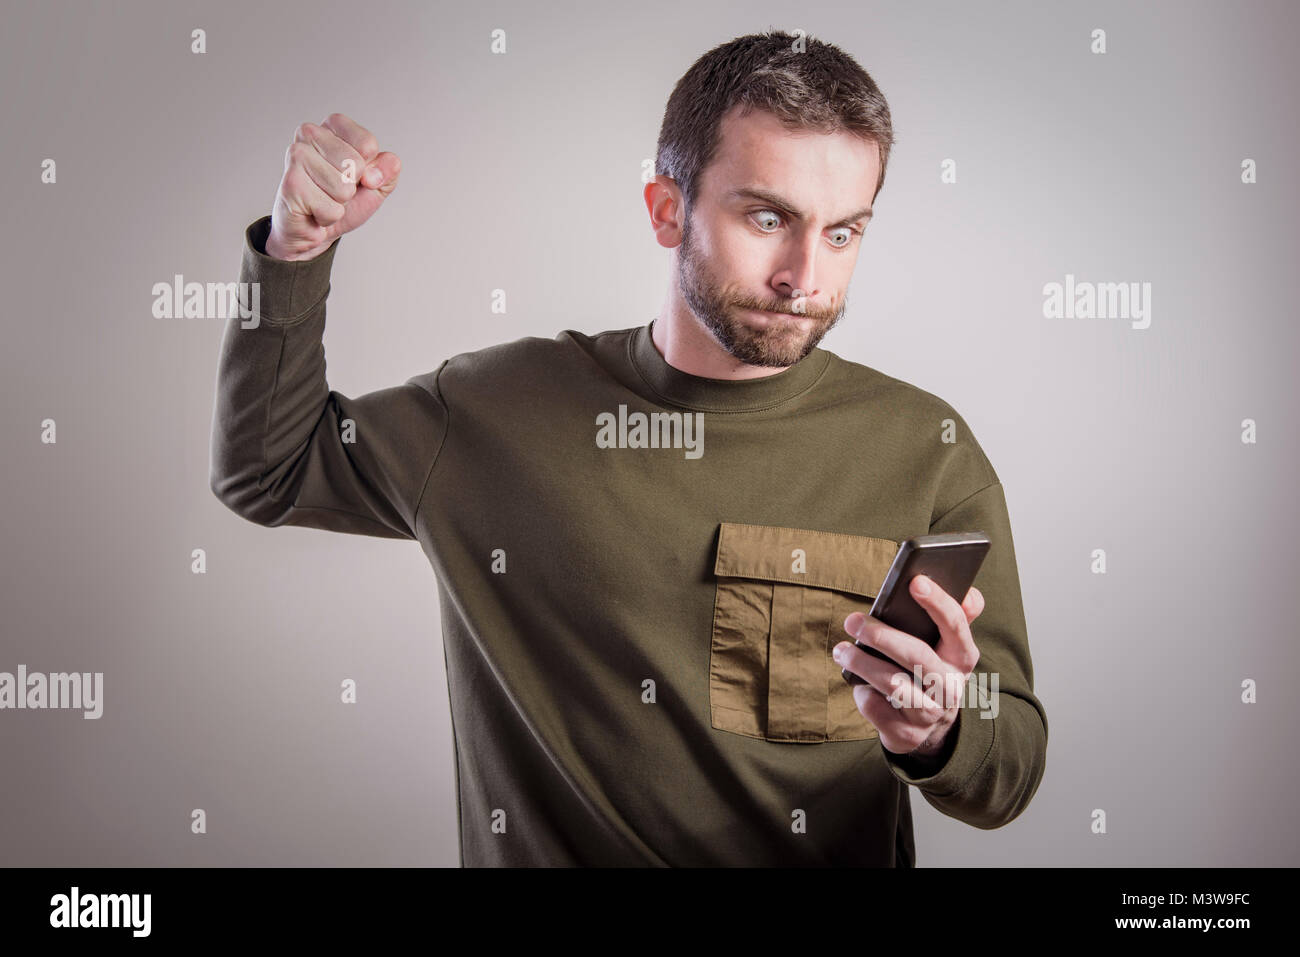 Man angry at his phone, outraged and enraged Stock Photo